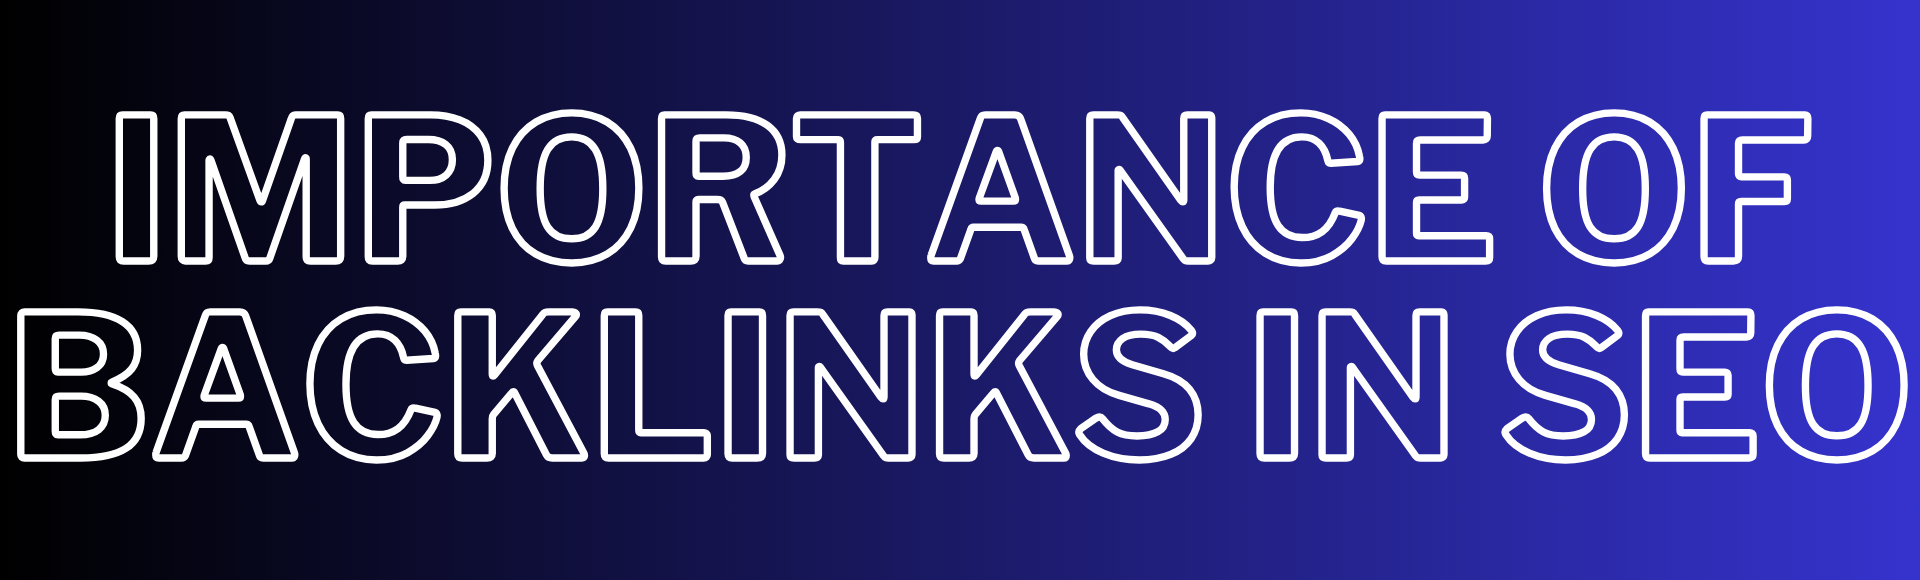 What are backlinks and why are they important in SEO?